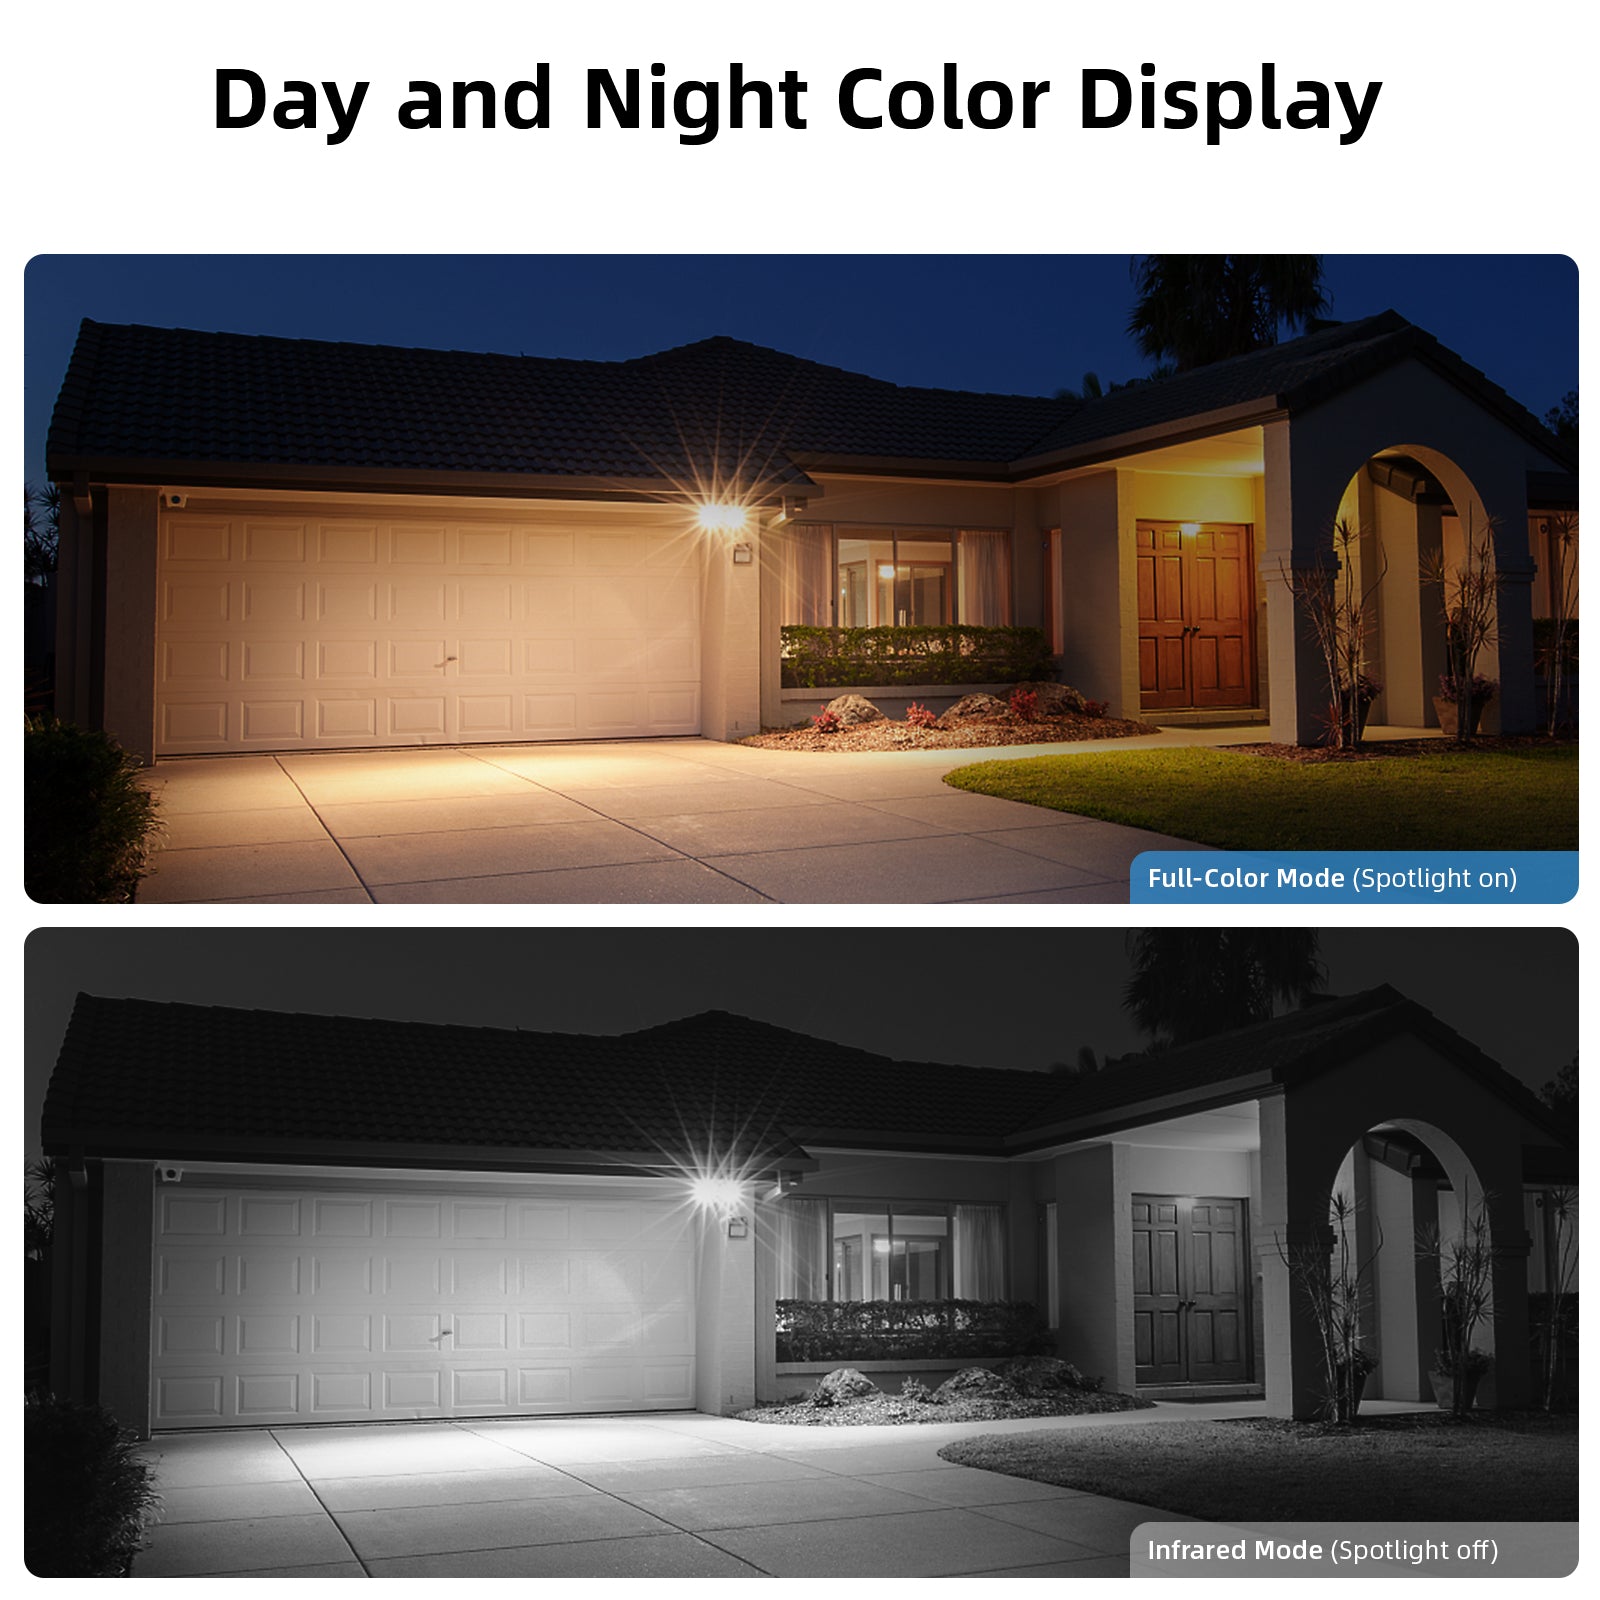 Day and Night Color Display